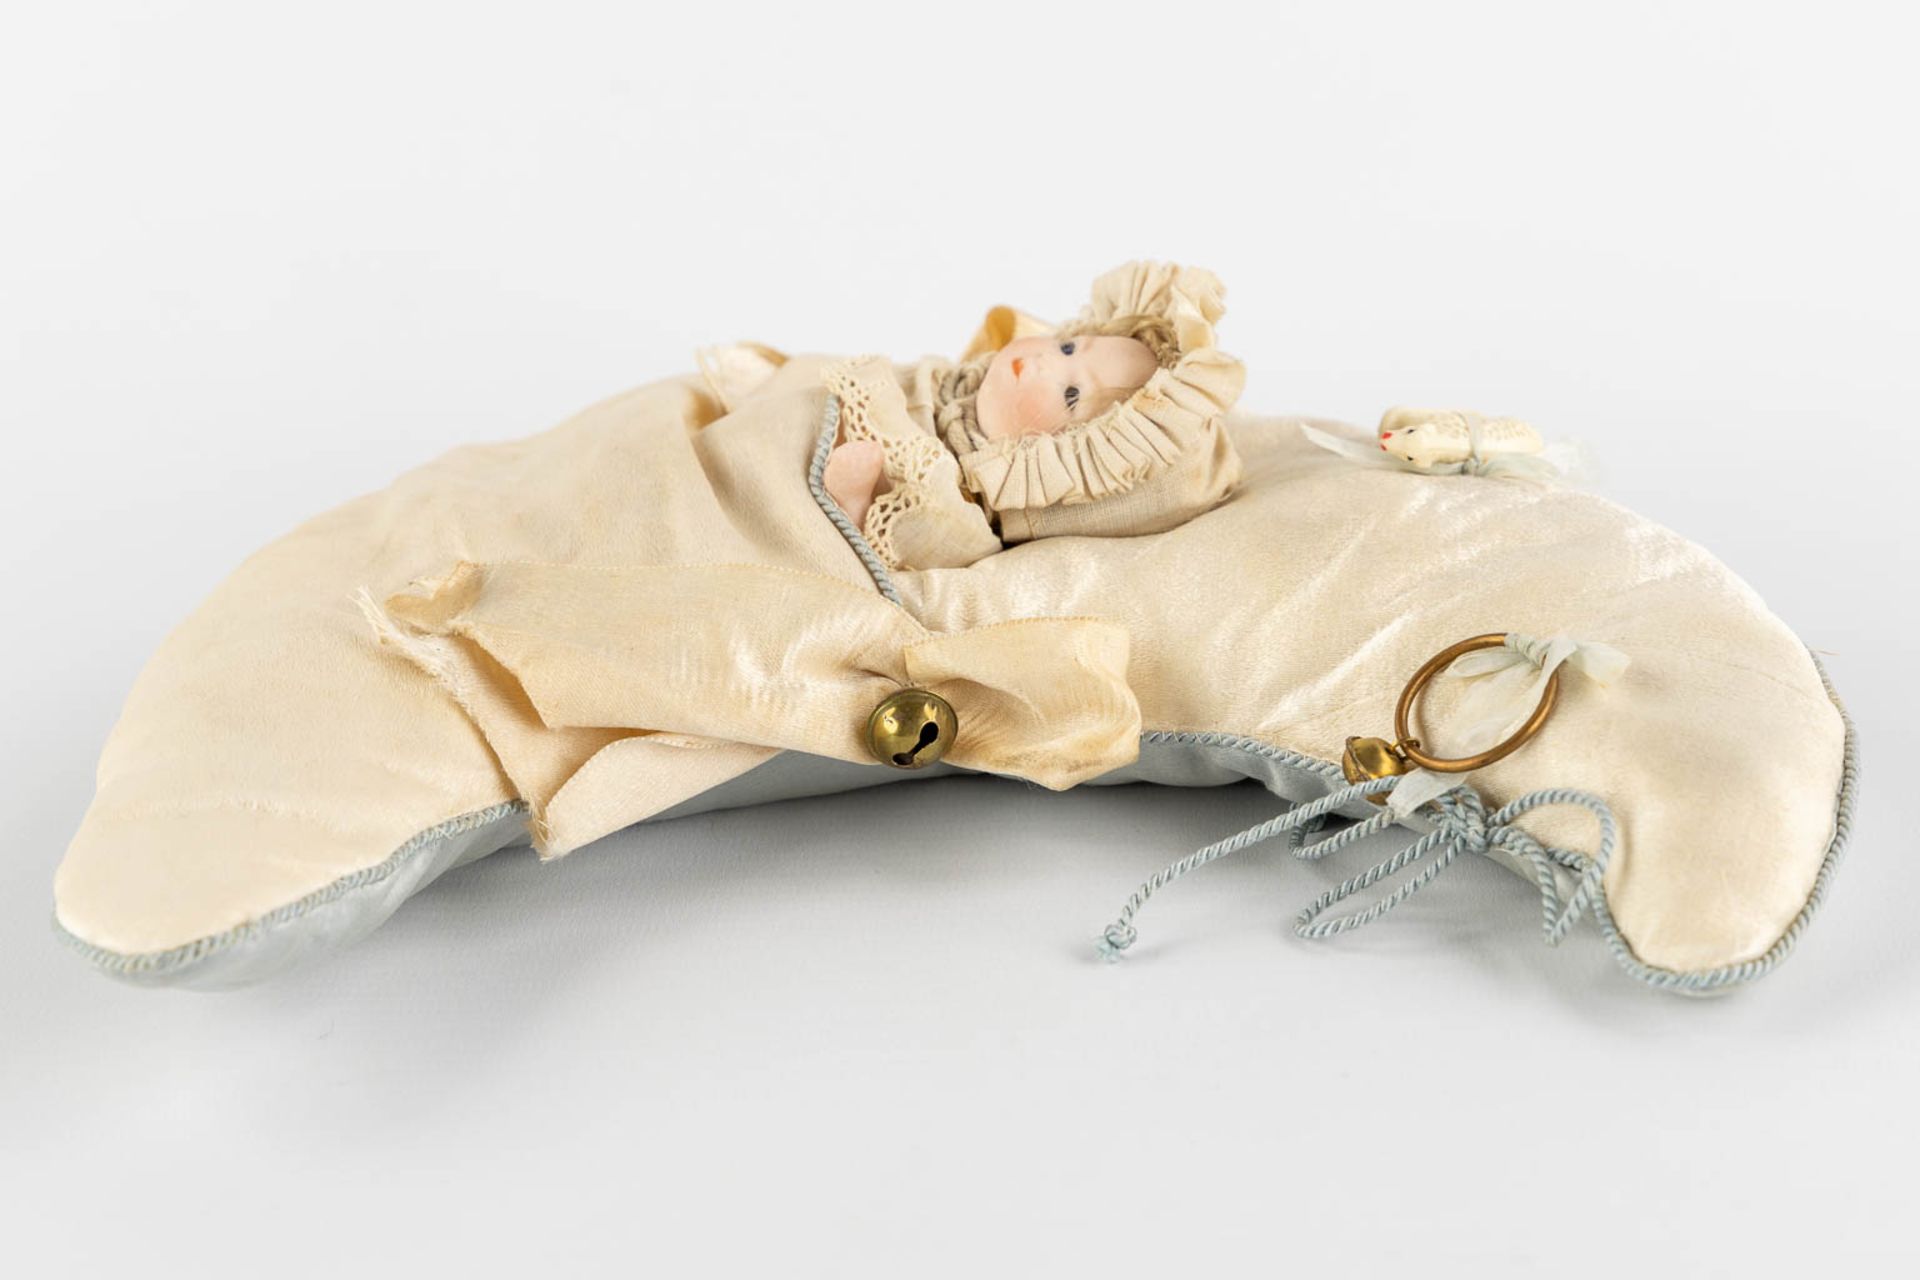 An antique doll in a crescent moon-shaped sleeping bag. Putnam 1922. (W:23 x H:26 cm) - Image 9 of 13